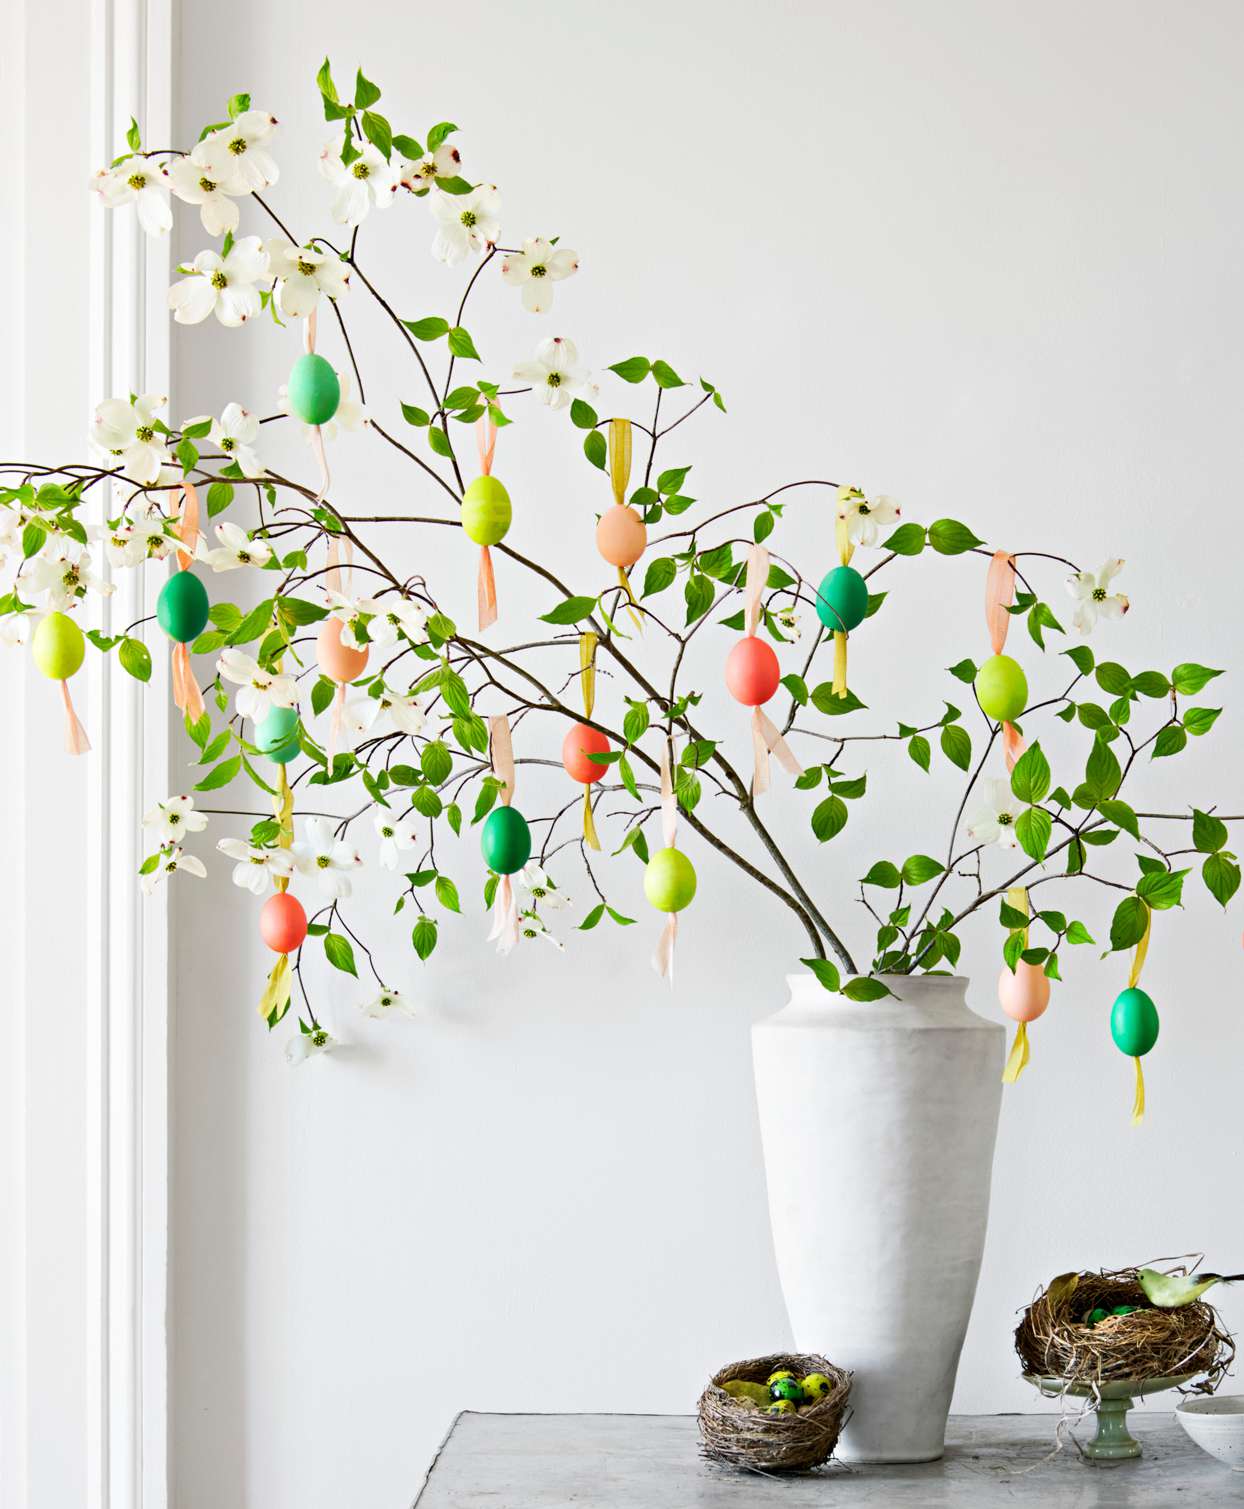 How to Make a Hanging Egg for Easter | Martha Stewart